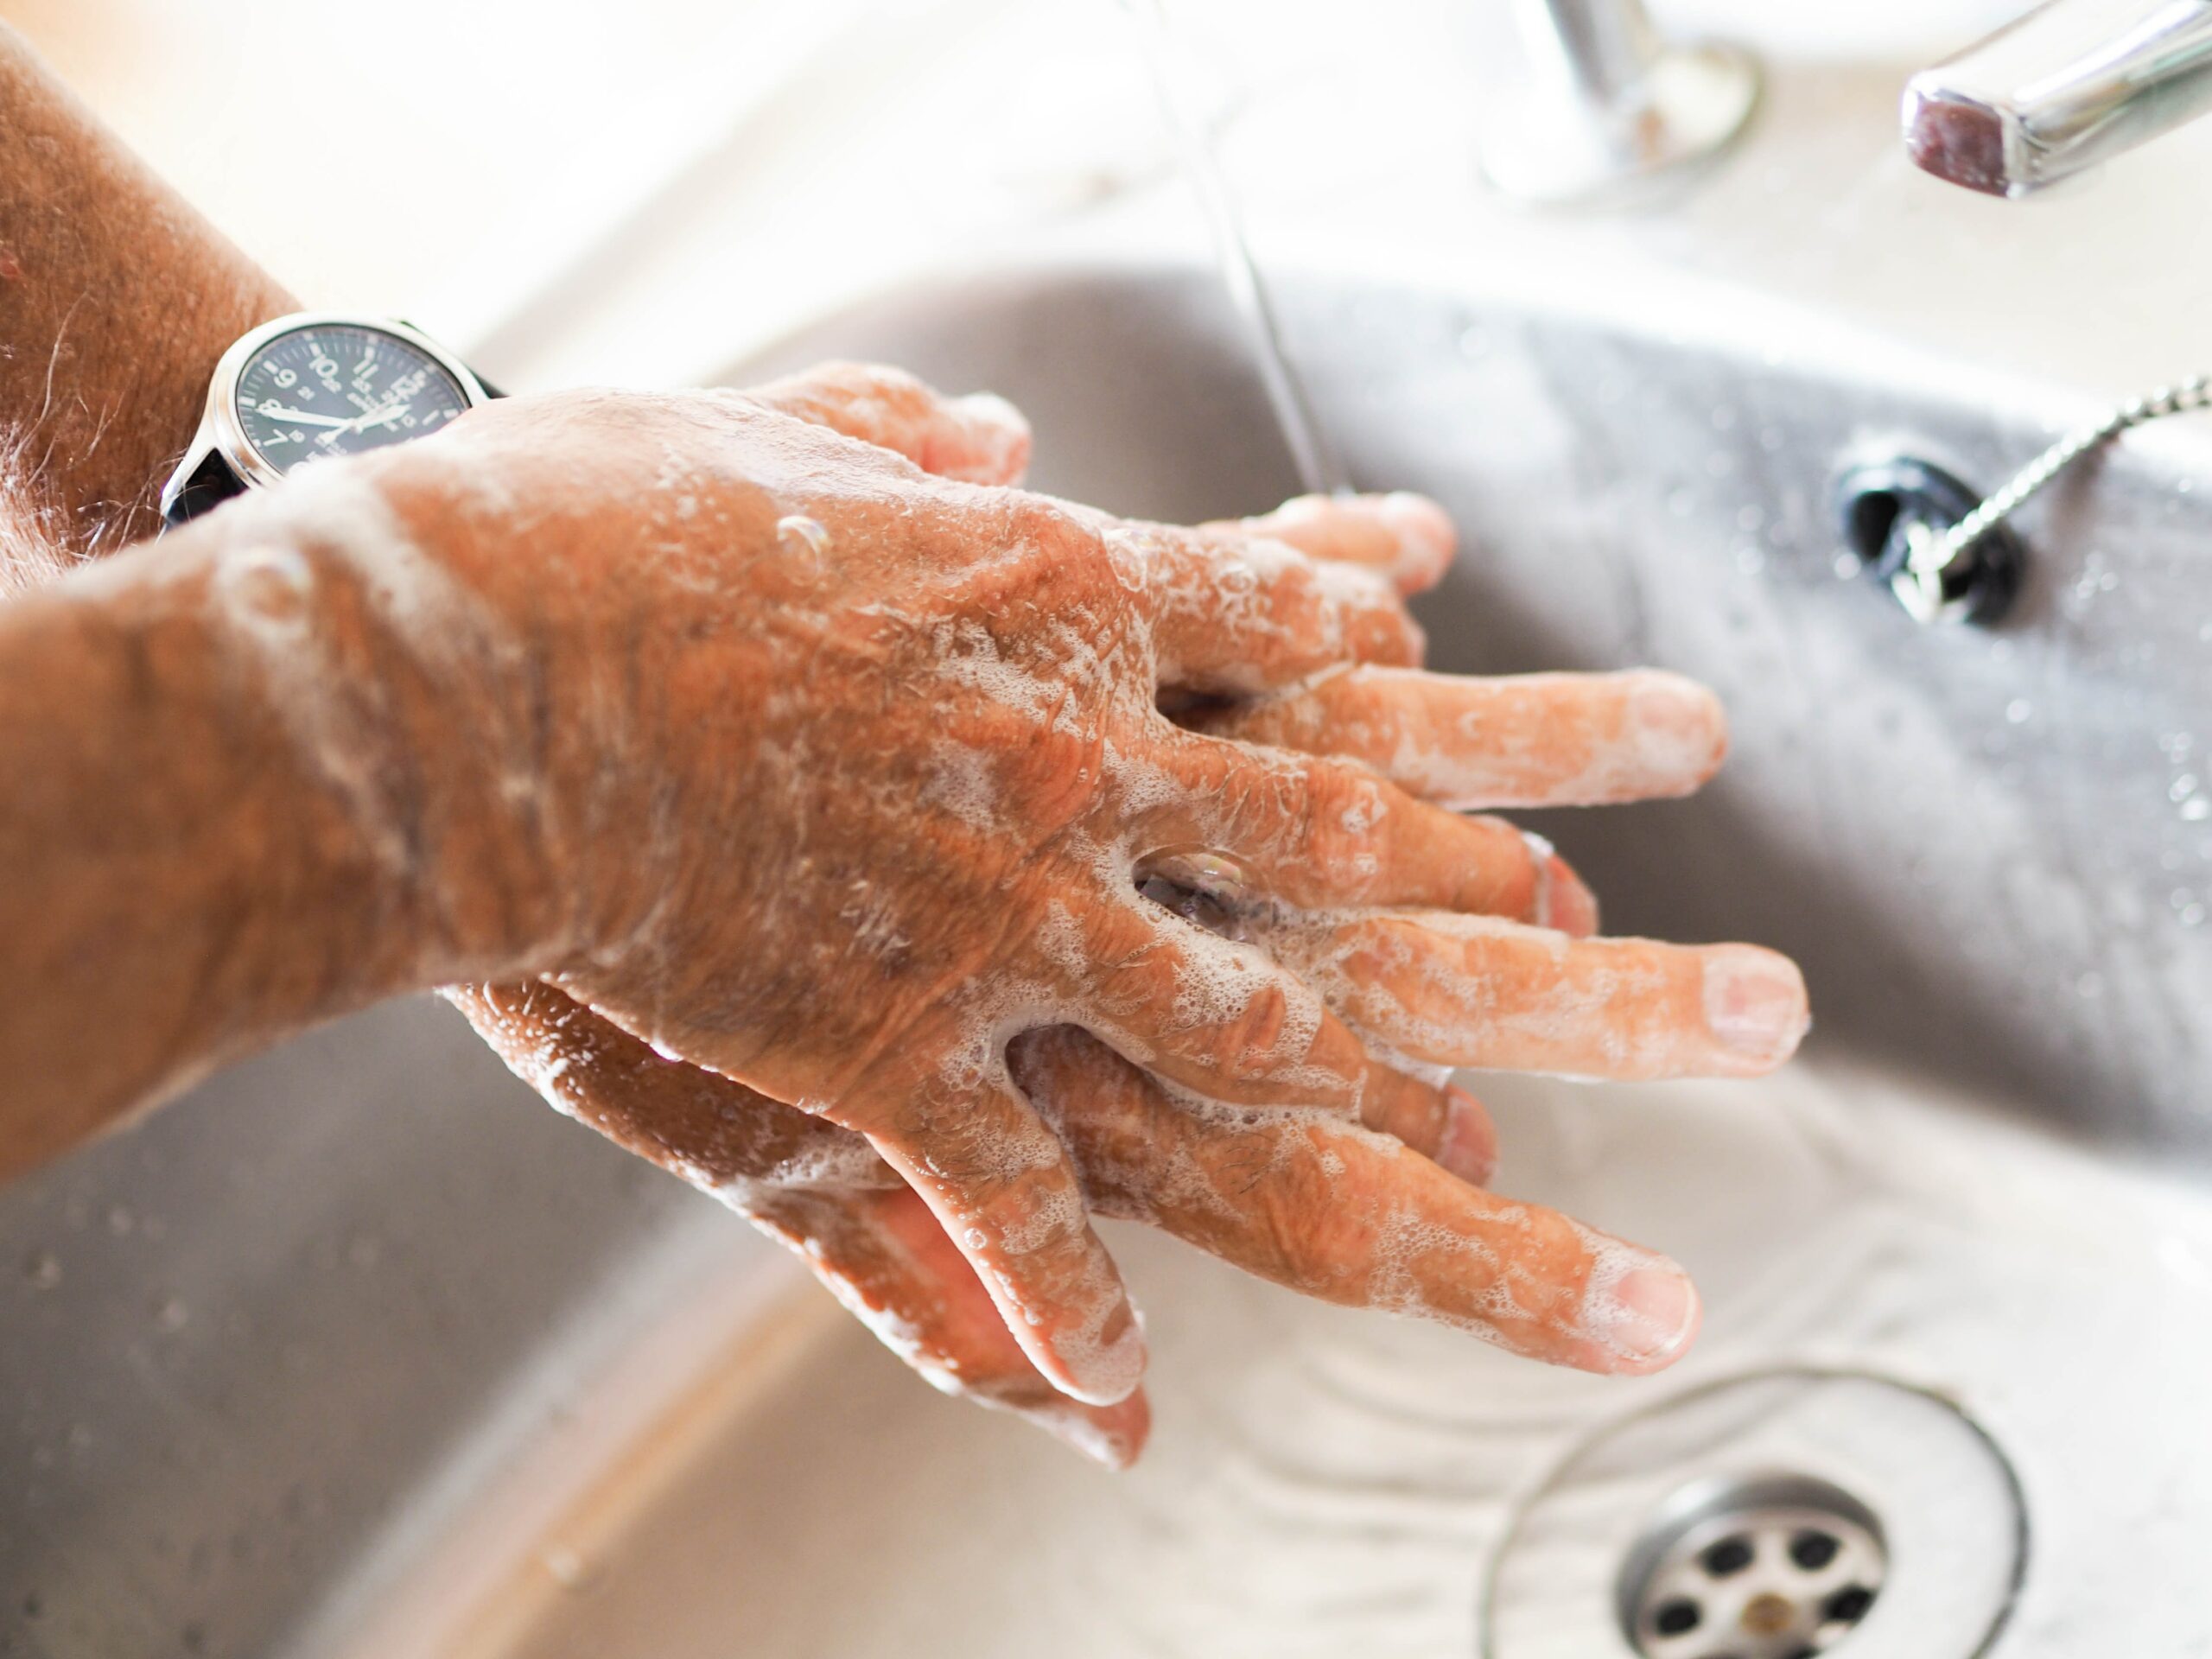 Why you should recommit to hand-washing to help prevent COVID